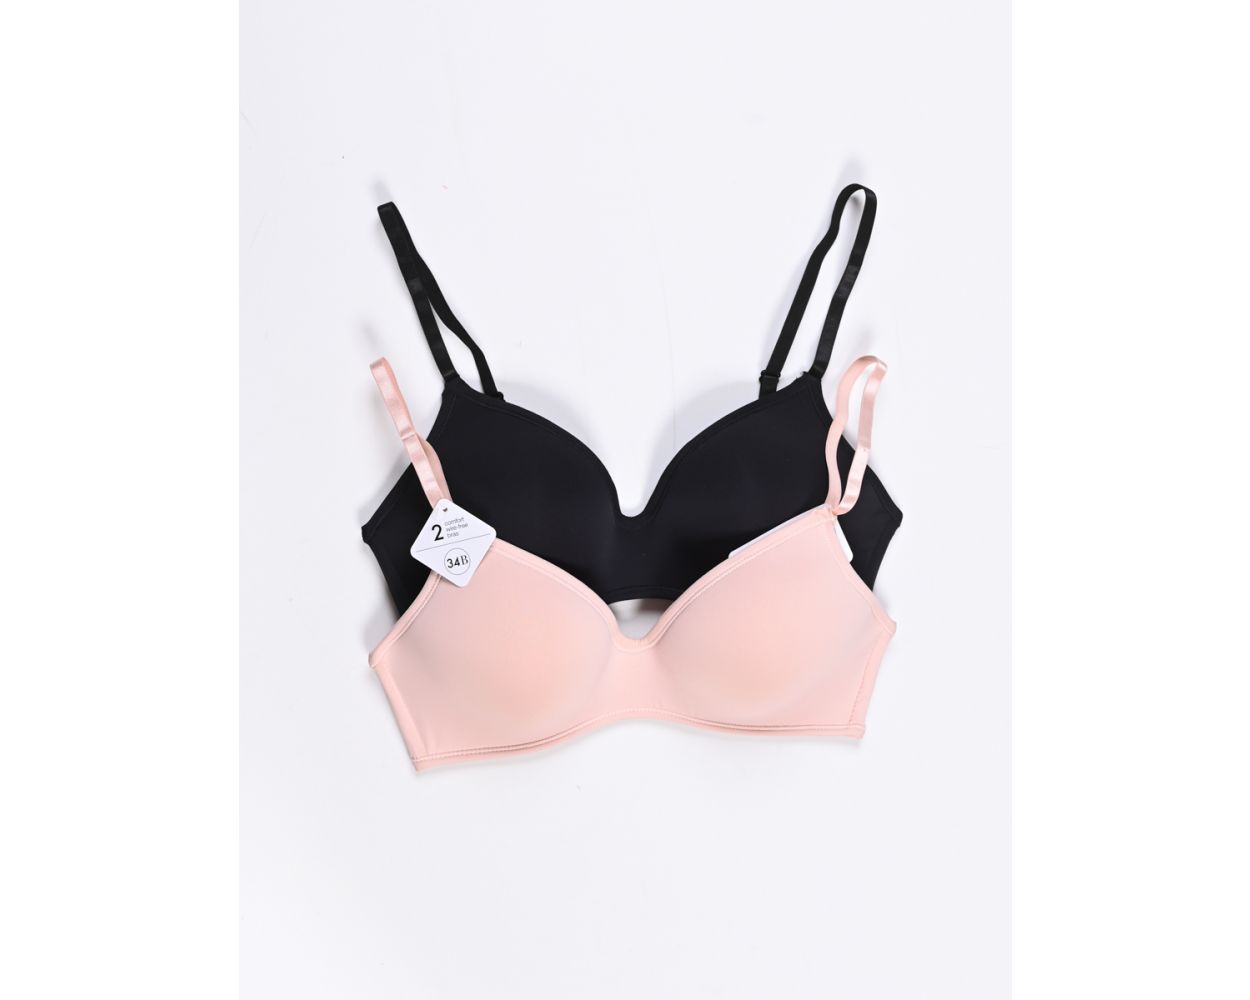 Micles Women's & Children's Clothing Rene Rofe Comfort Wire-Free Bras New  Holiday Collection Online